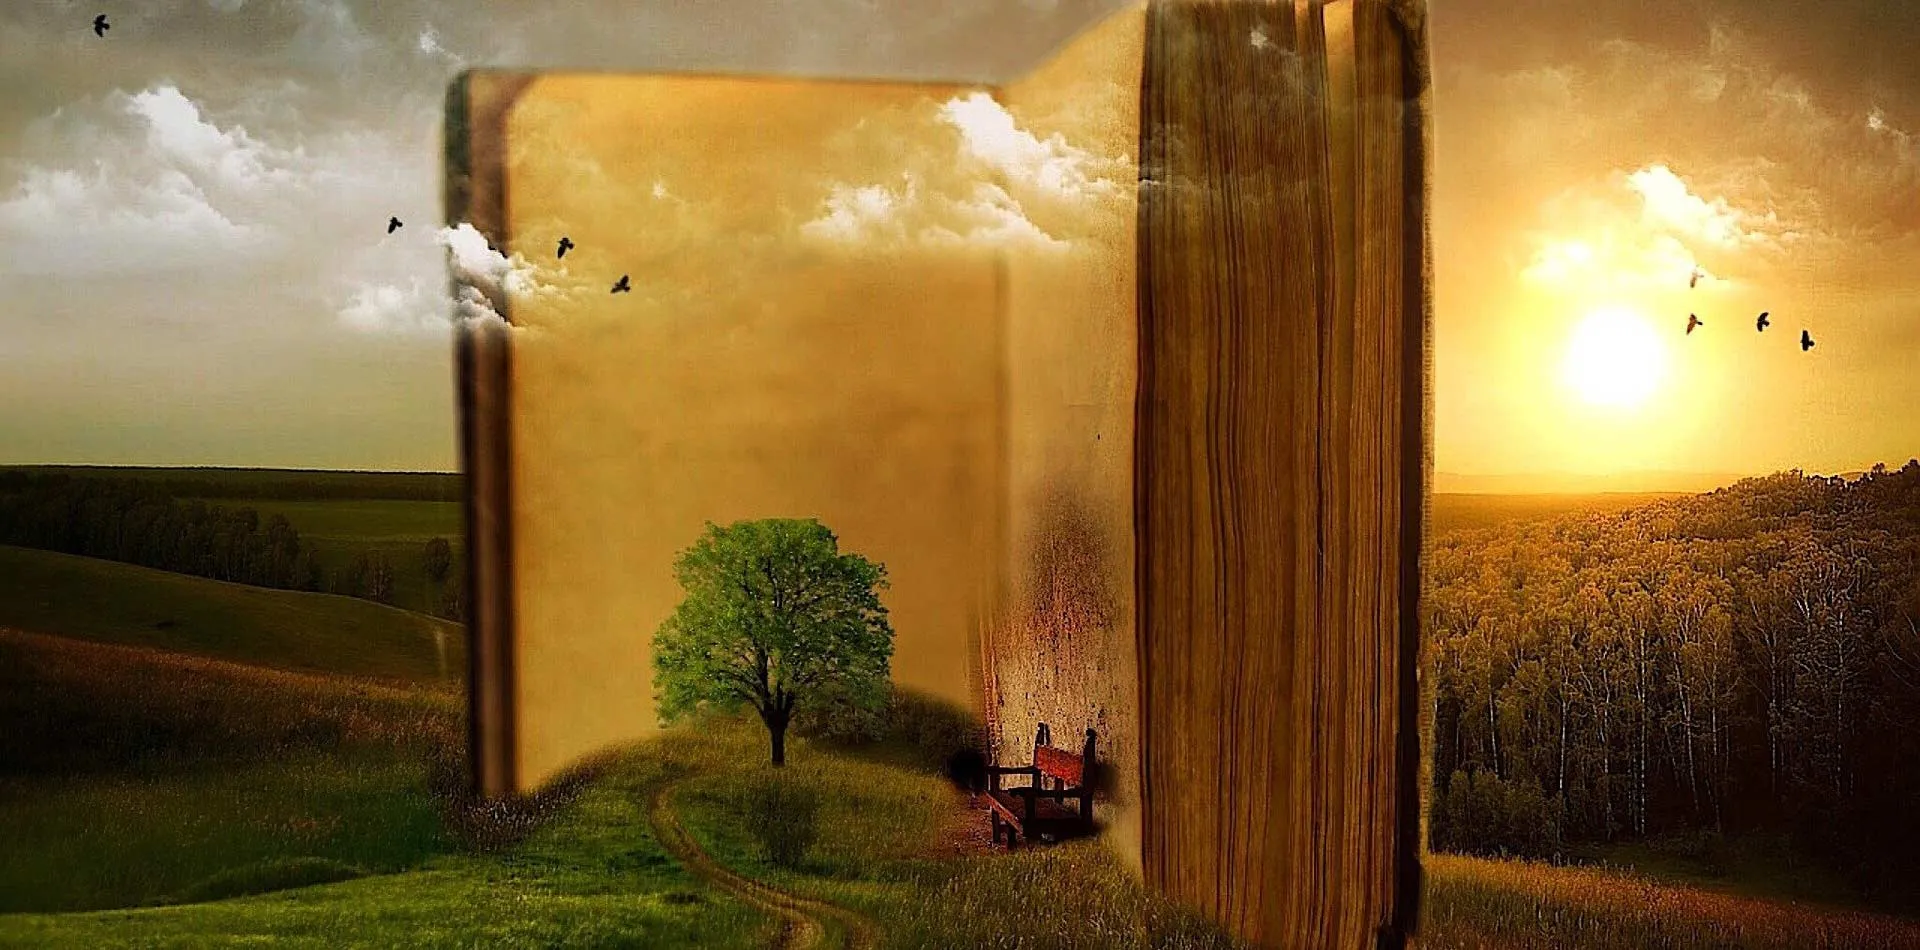 Open book depicting scenery with a tree